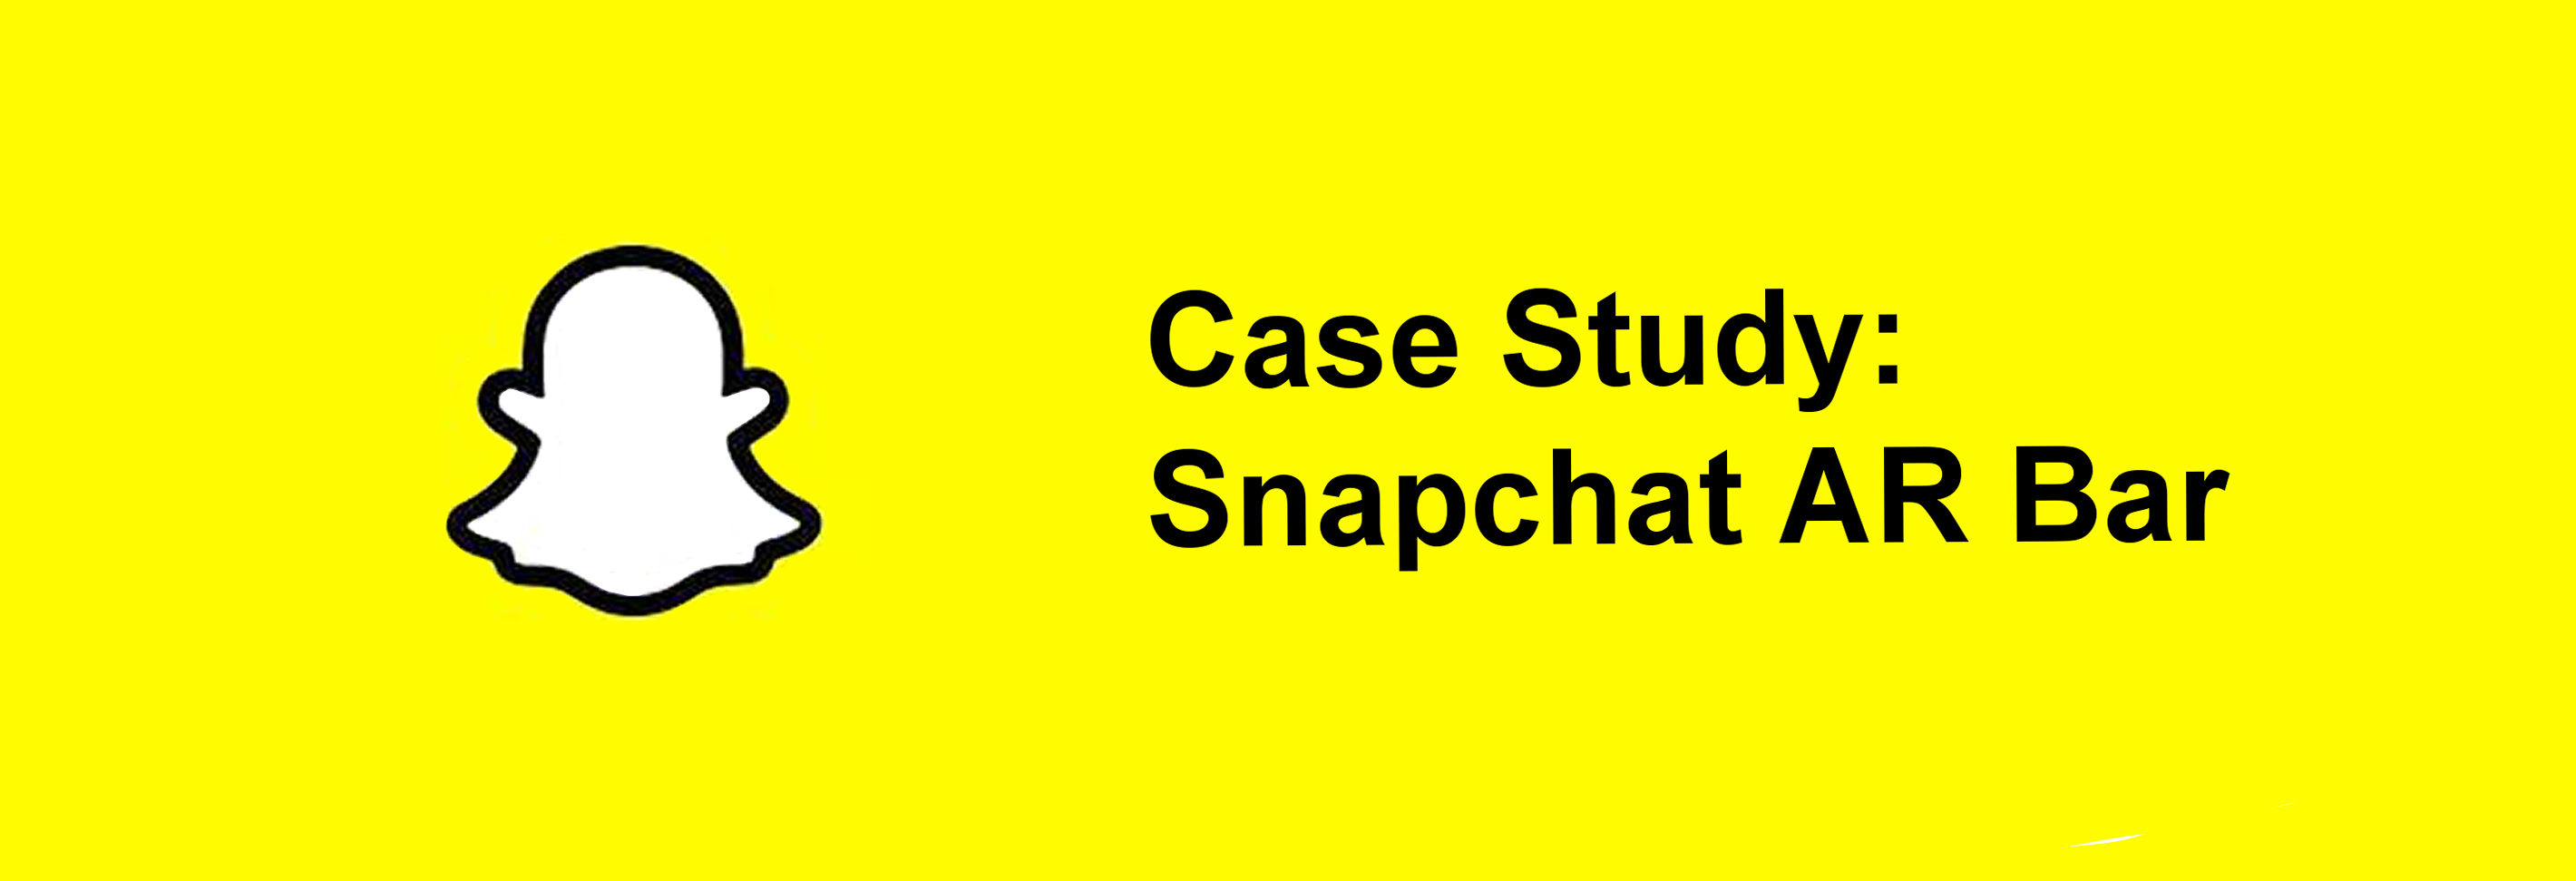 case study banner for snapchat